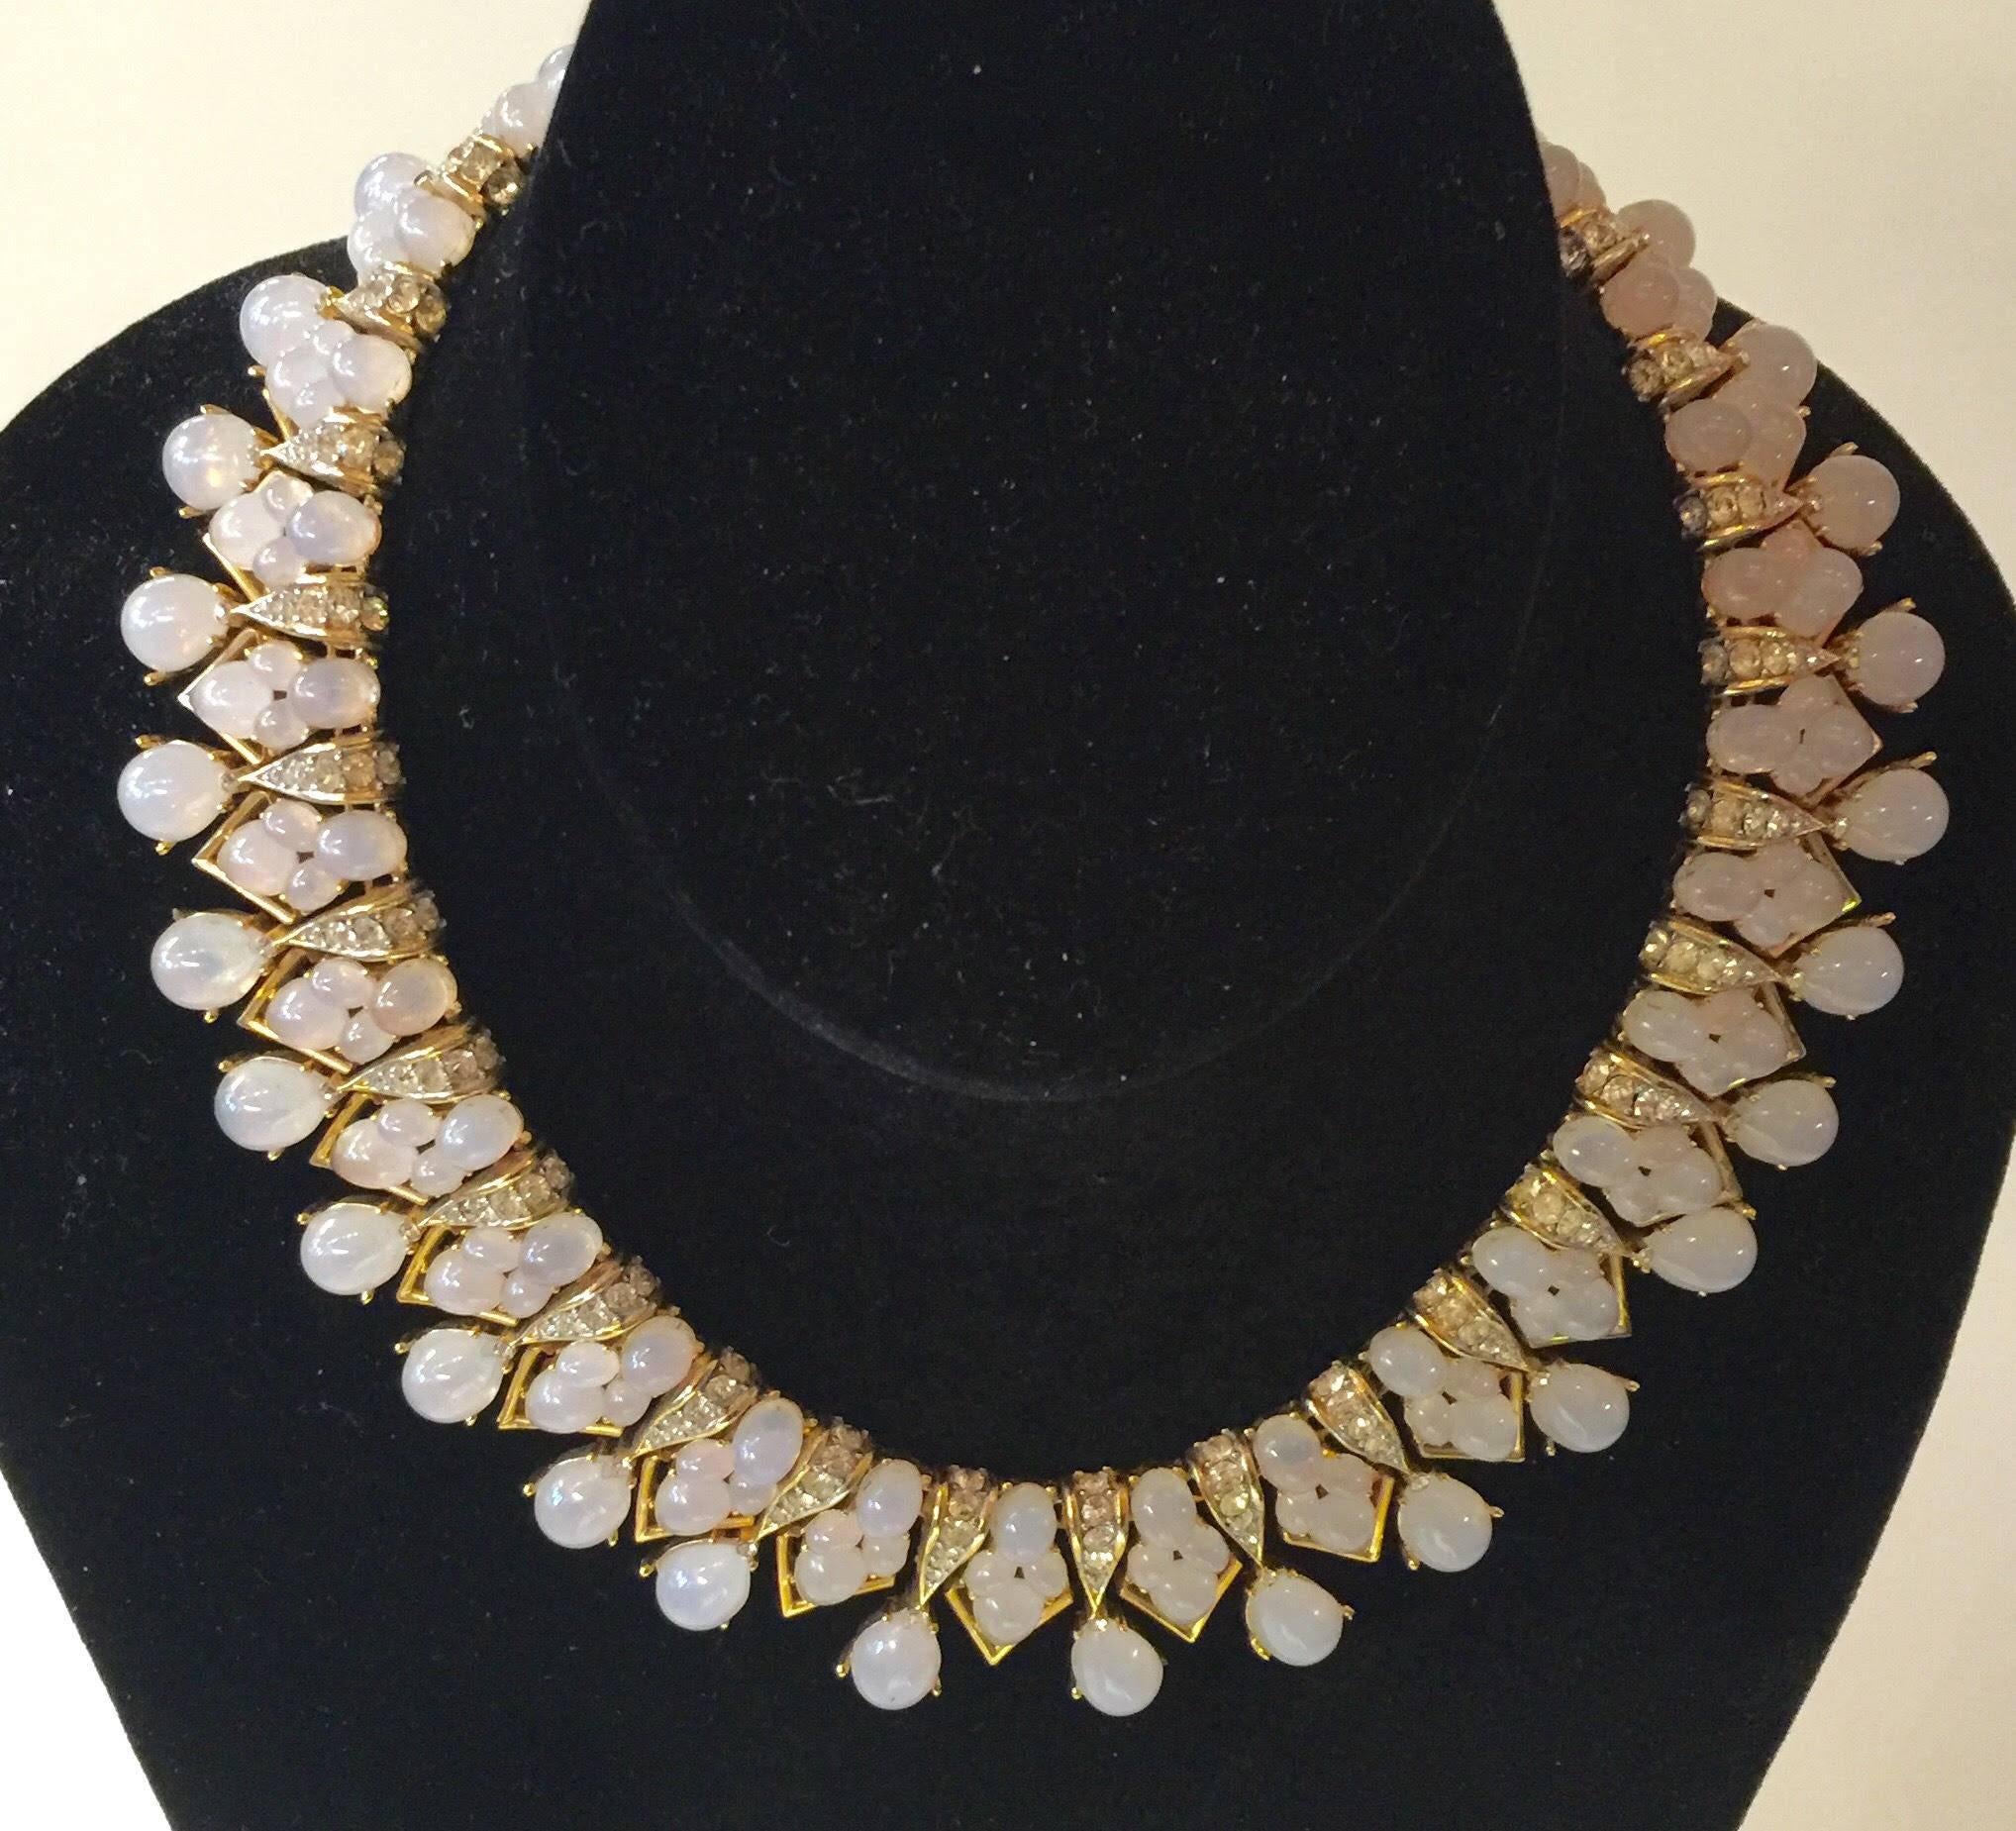 This amazing TRIFARI 1960s Faux Moonstone and Diamante statement necklace is a work of a master jeweler's art. Created in the late 1950s and immeasurably beautiful, it was designed by Alfred Phillipe and is executed at the level of quality and